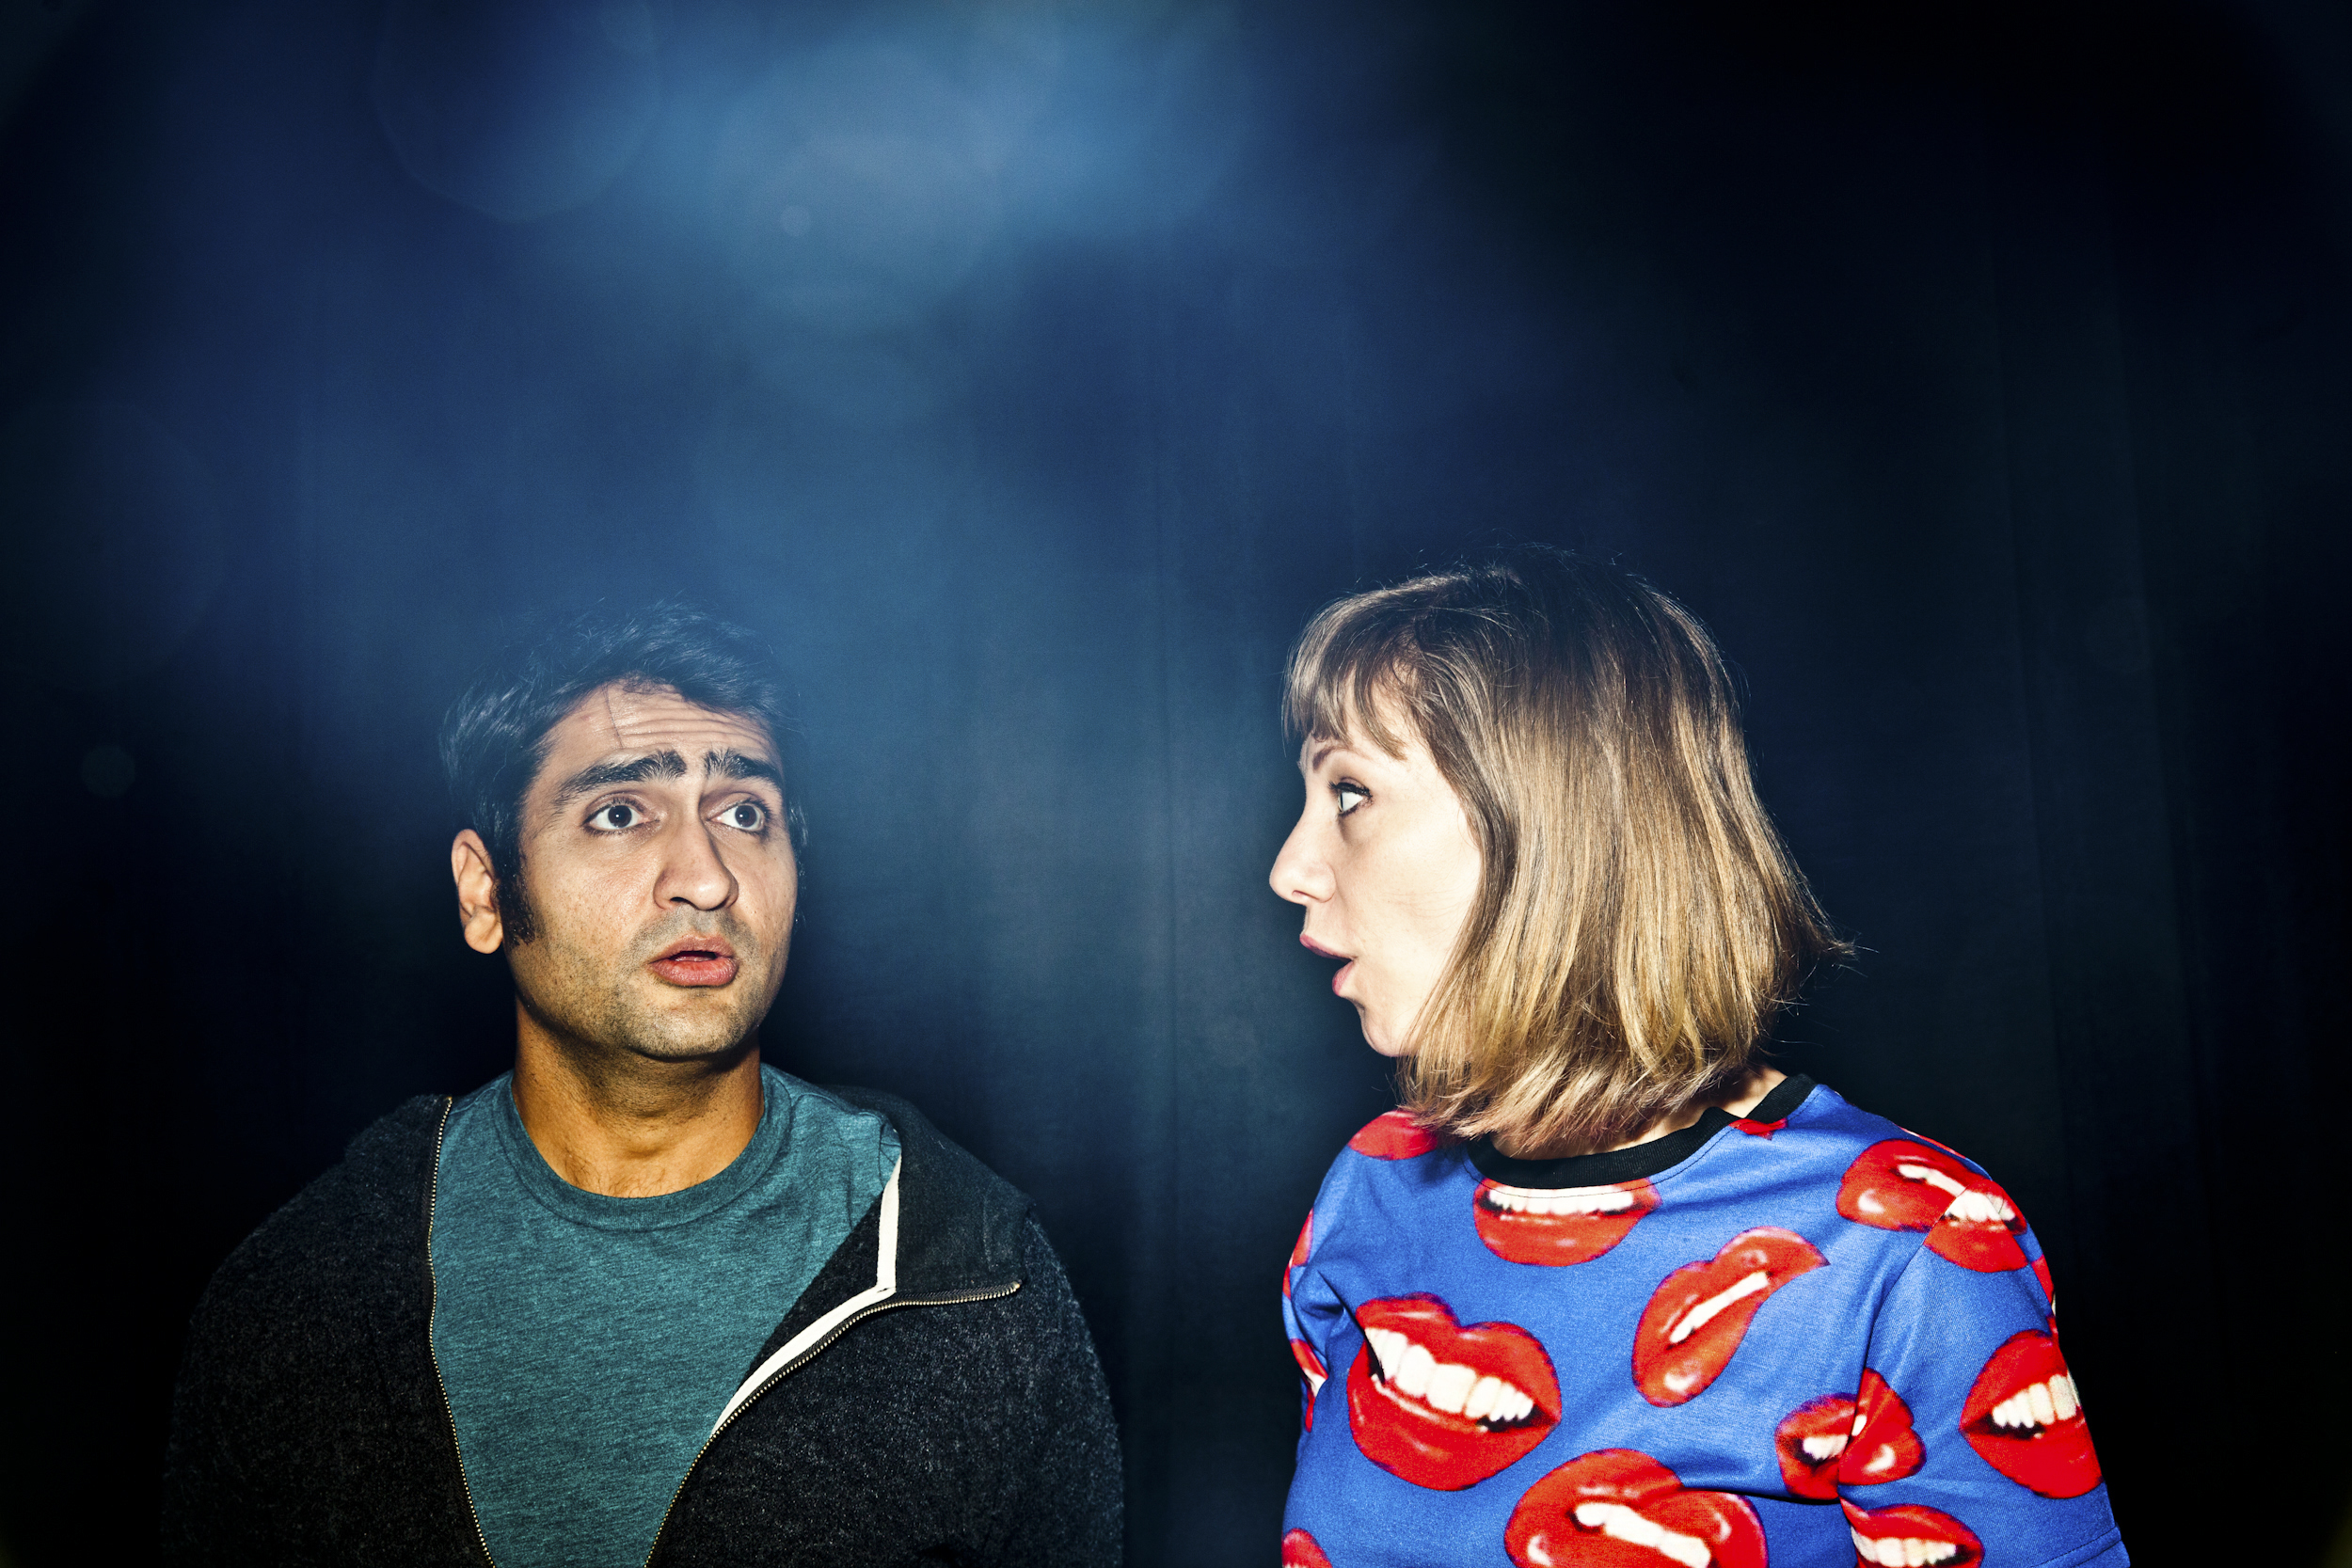   Podcasters and gamers&nbsp;Kumail Nanjiani and Emily Gordon for WIRED.  